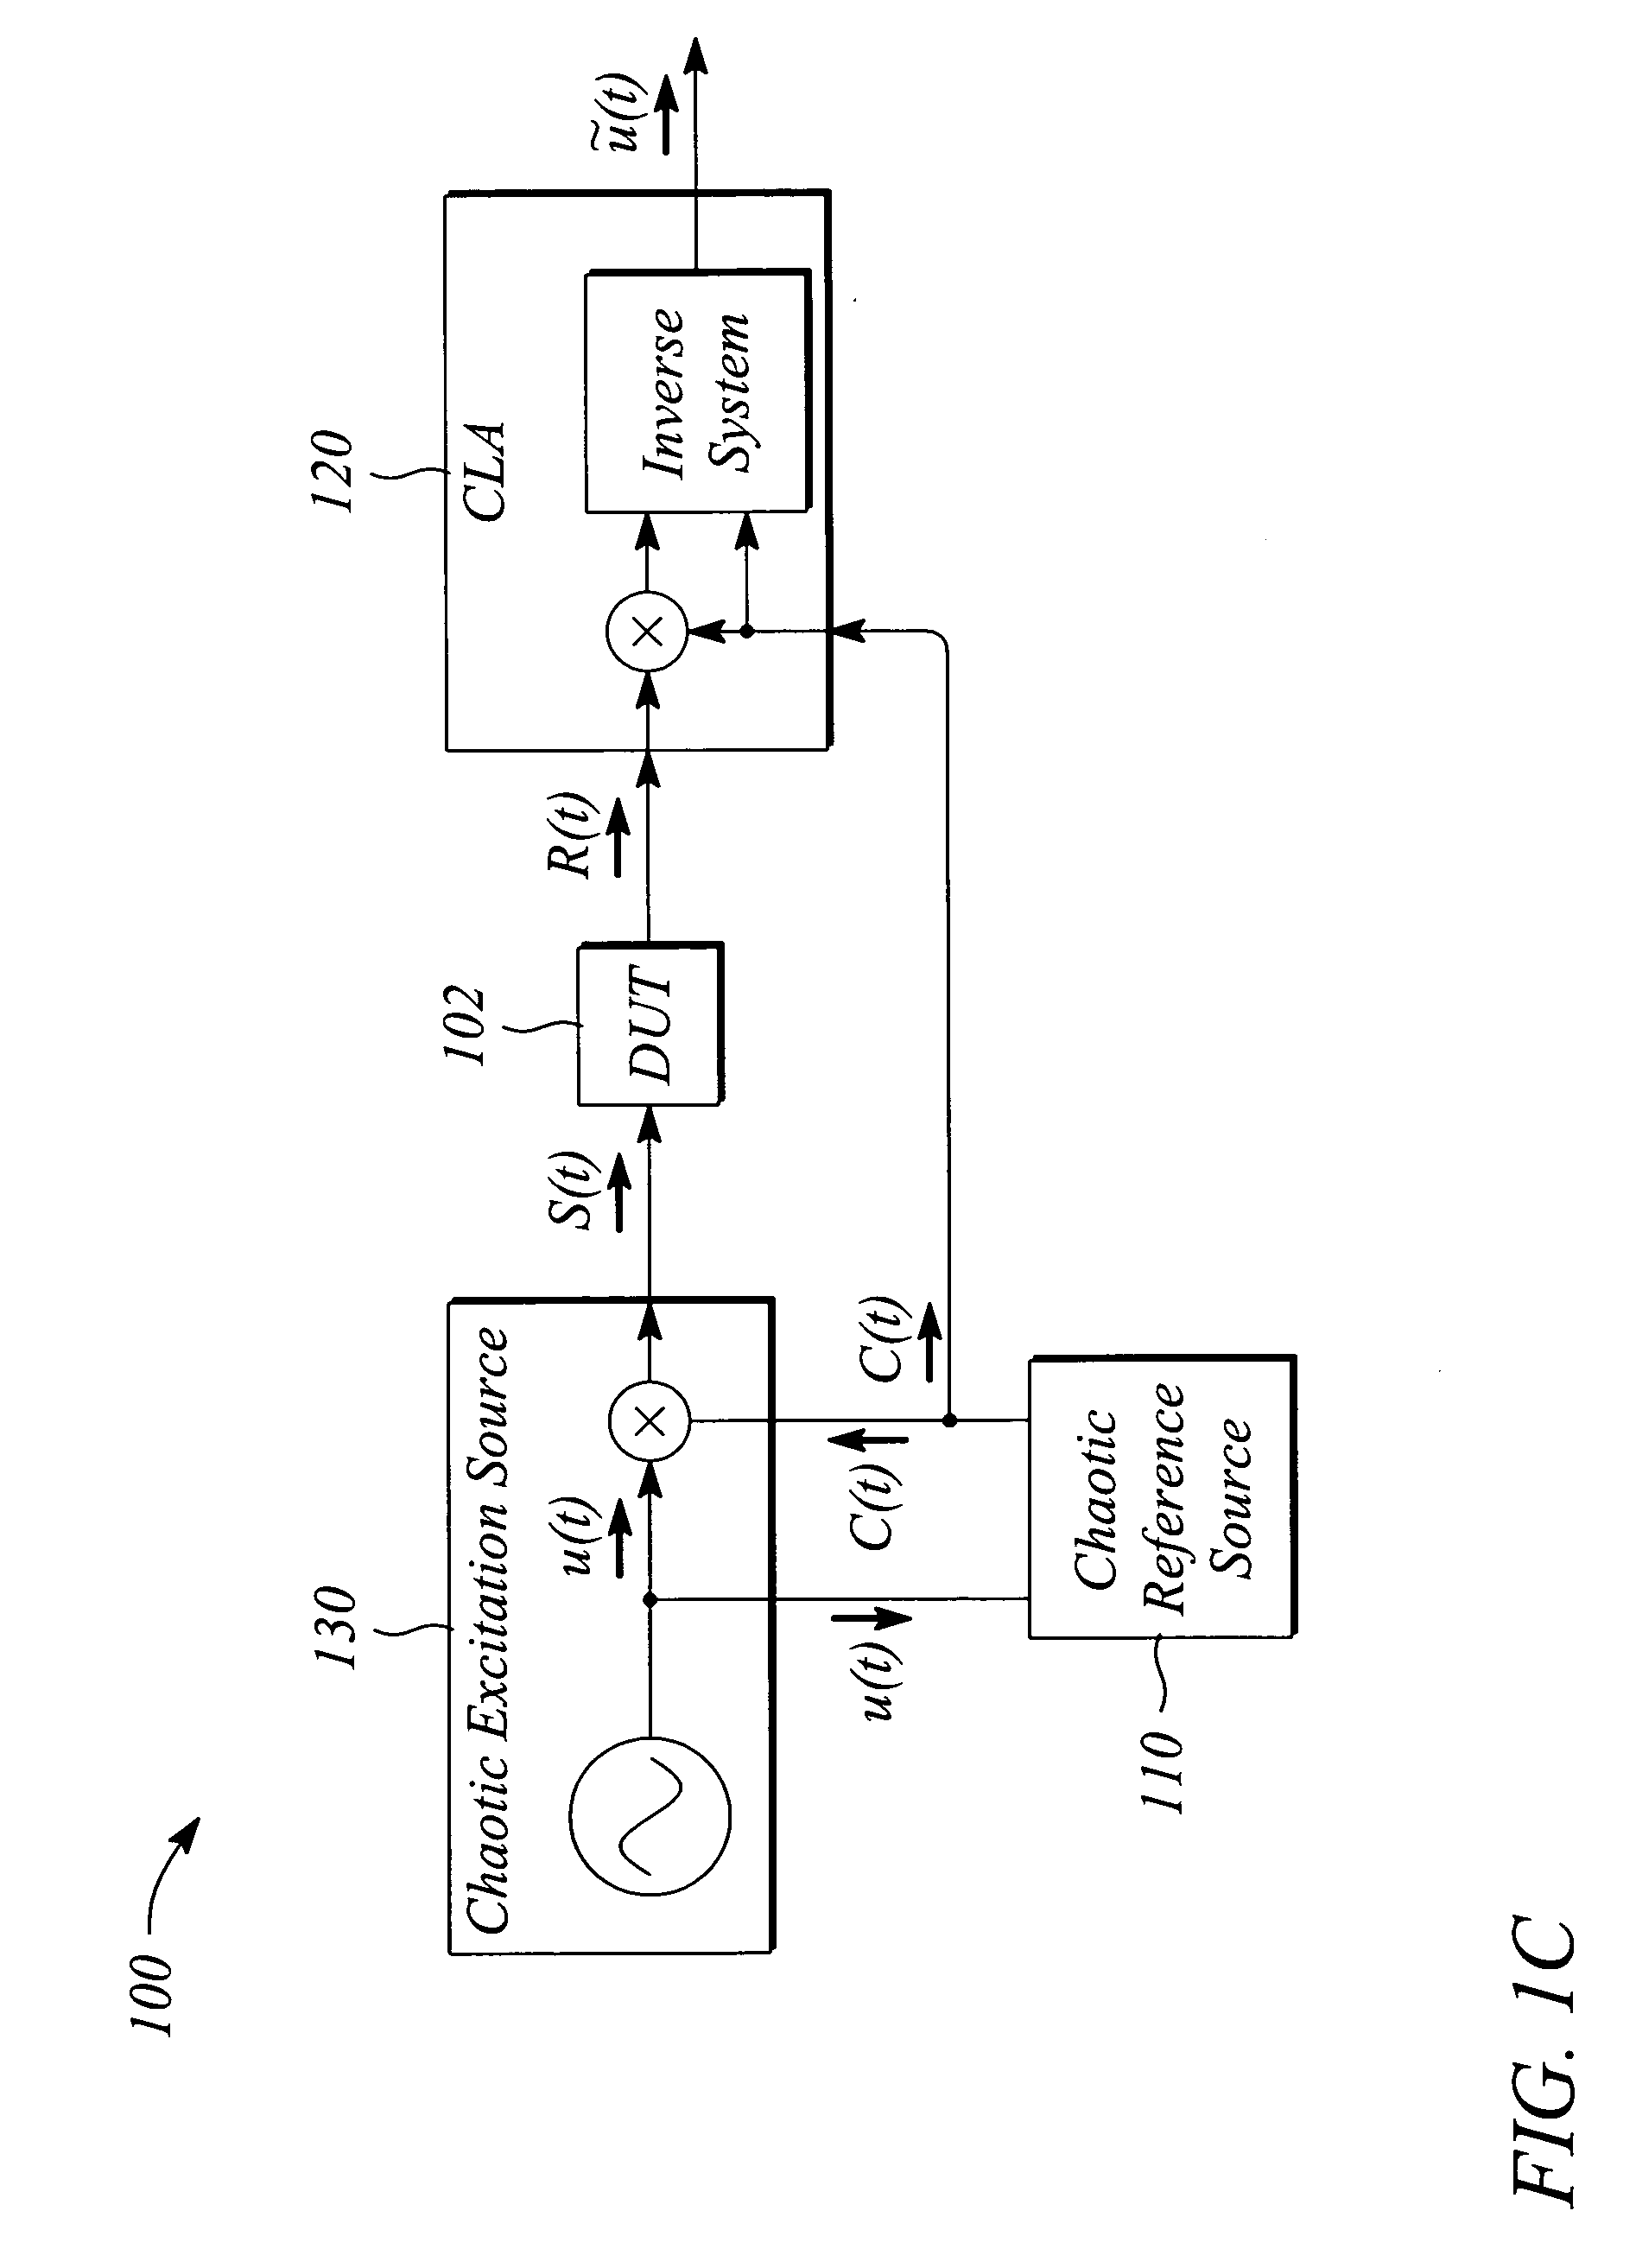 Stimulation-response measurement system and method using a chaotic lock-in amplifier